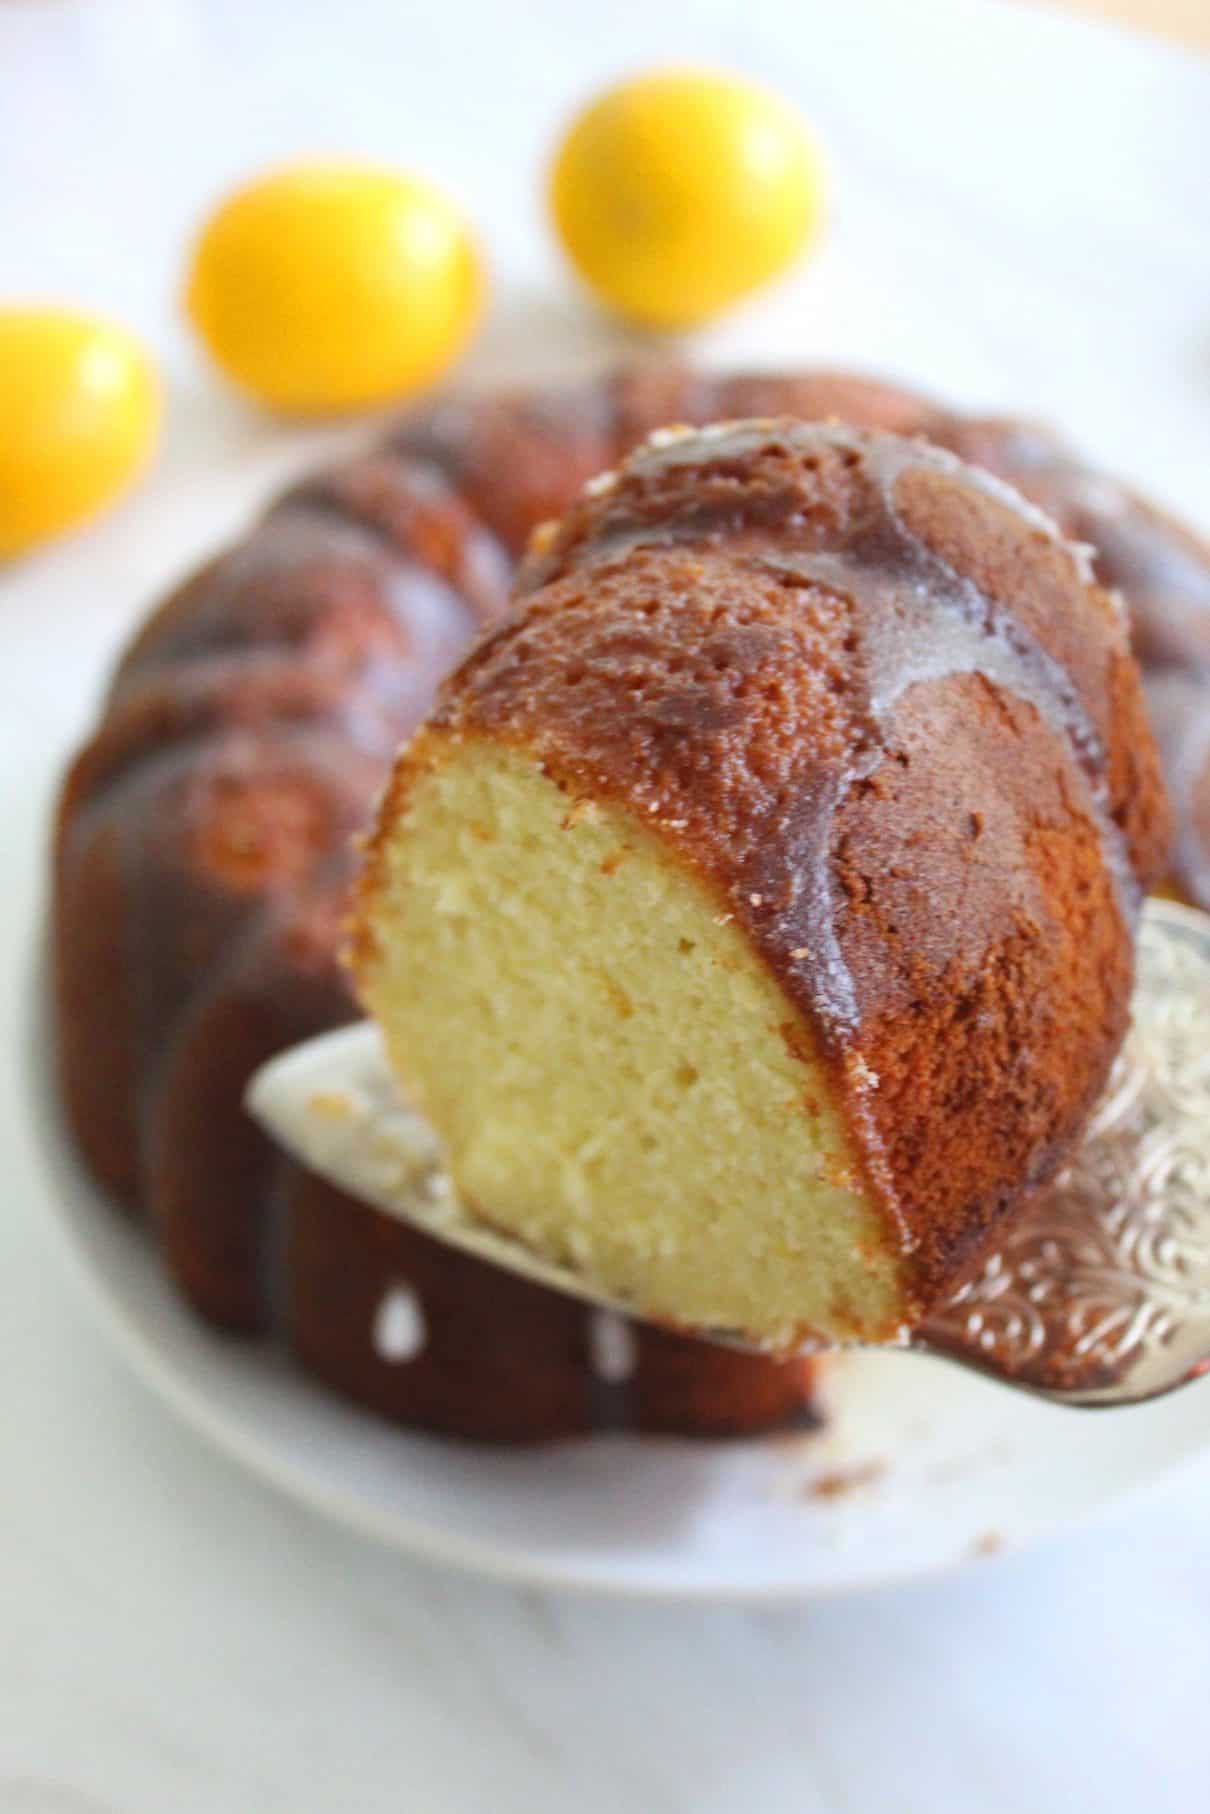 A slice of Lemon Bundt cake. The actual cake is in the back